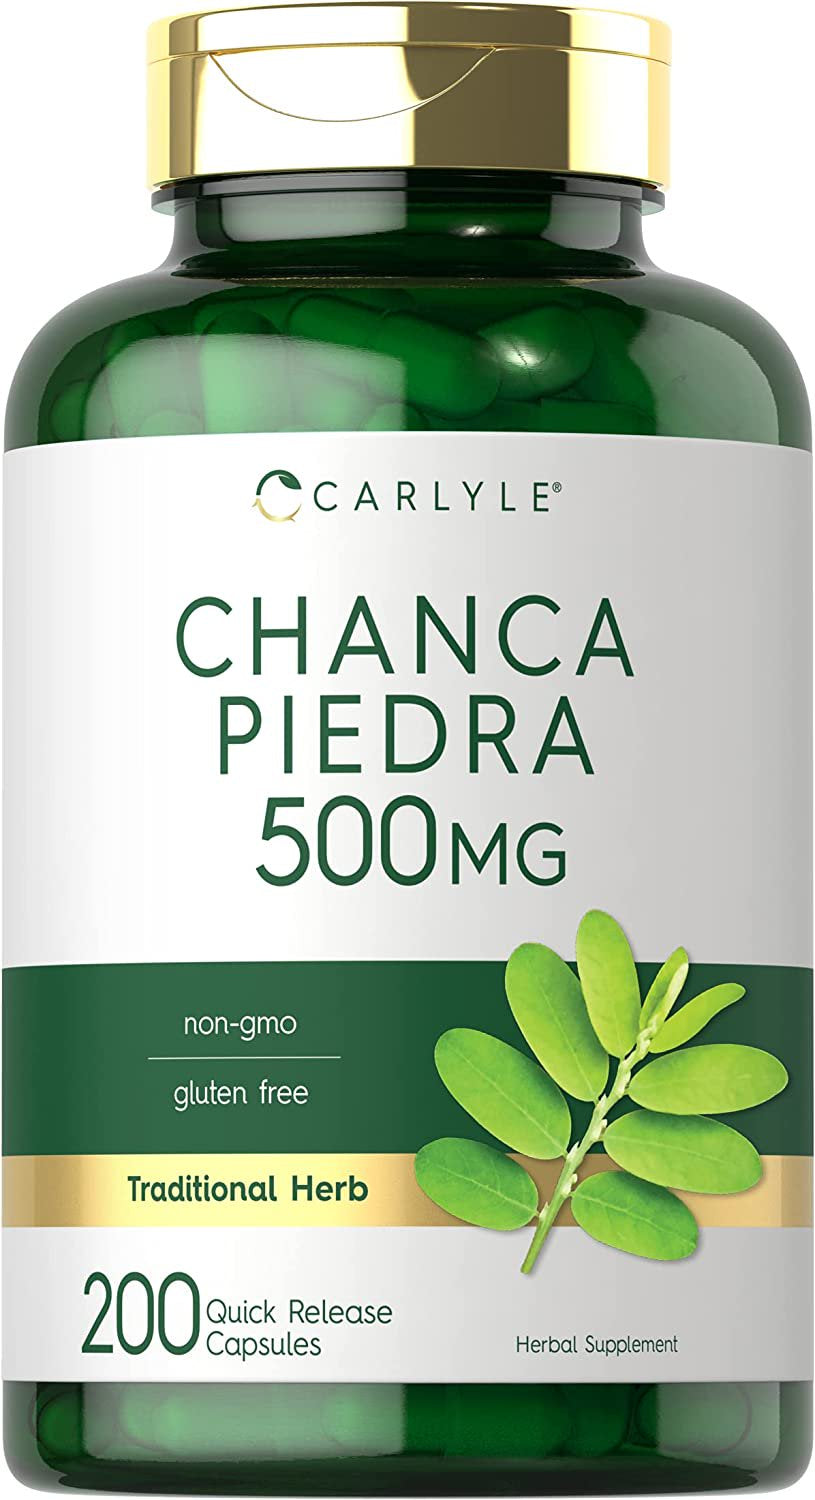 Chanca Piedra | 500Mg | 200 Capsules | Traditional Herb Formula | by Carlyle